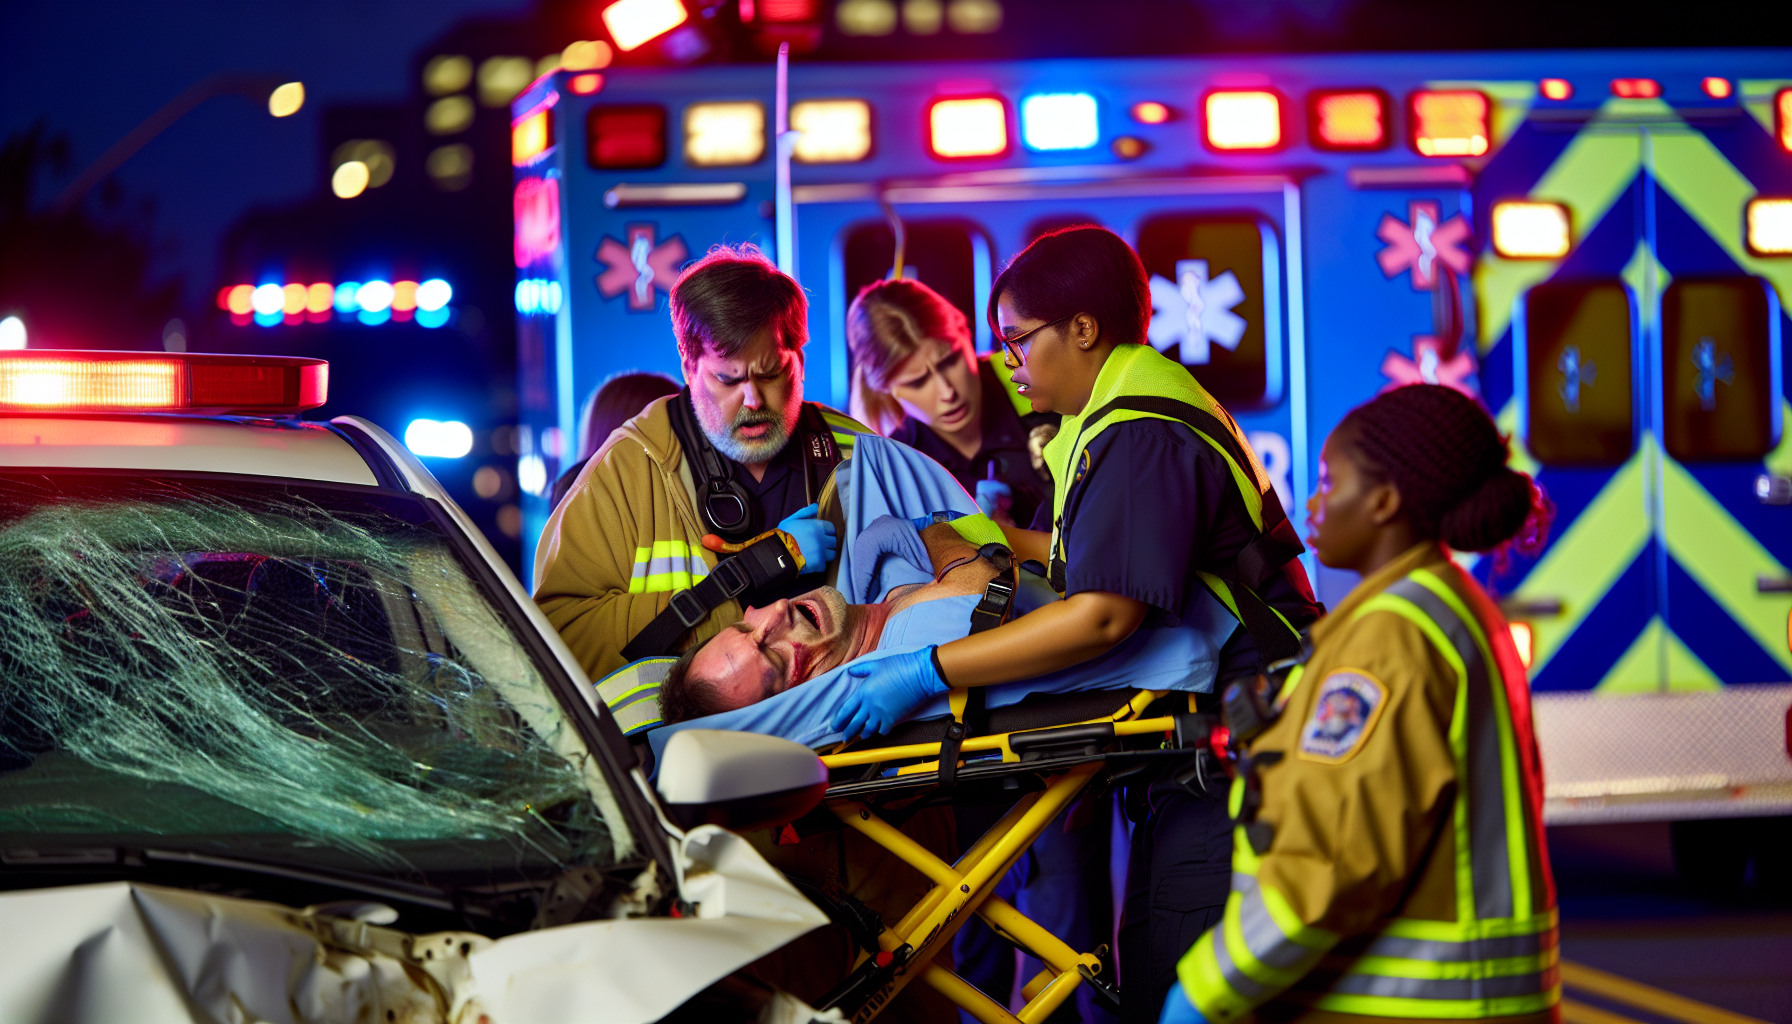 Car accident scene with injured person receiving medical aid